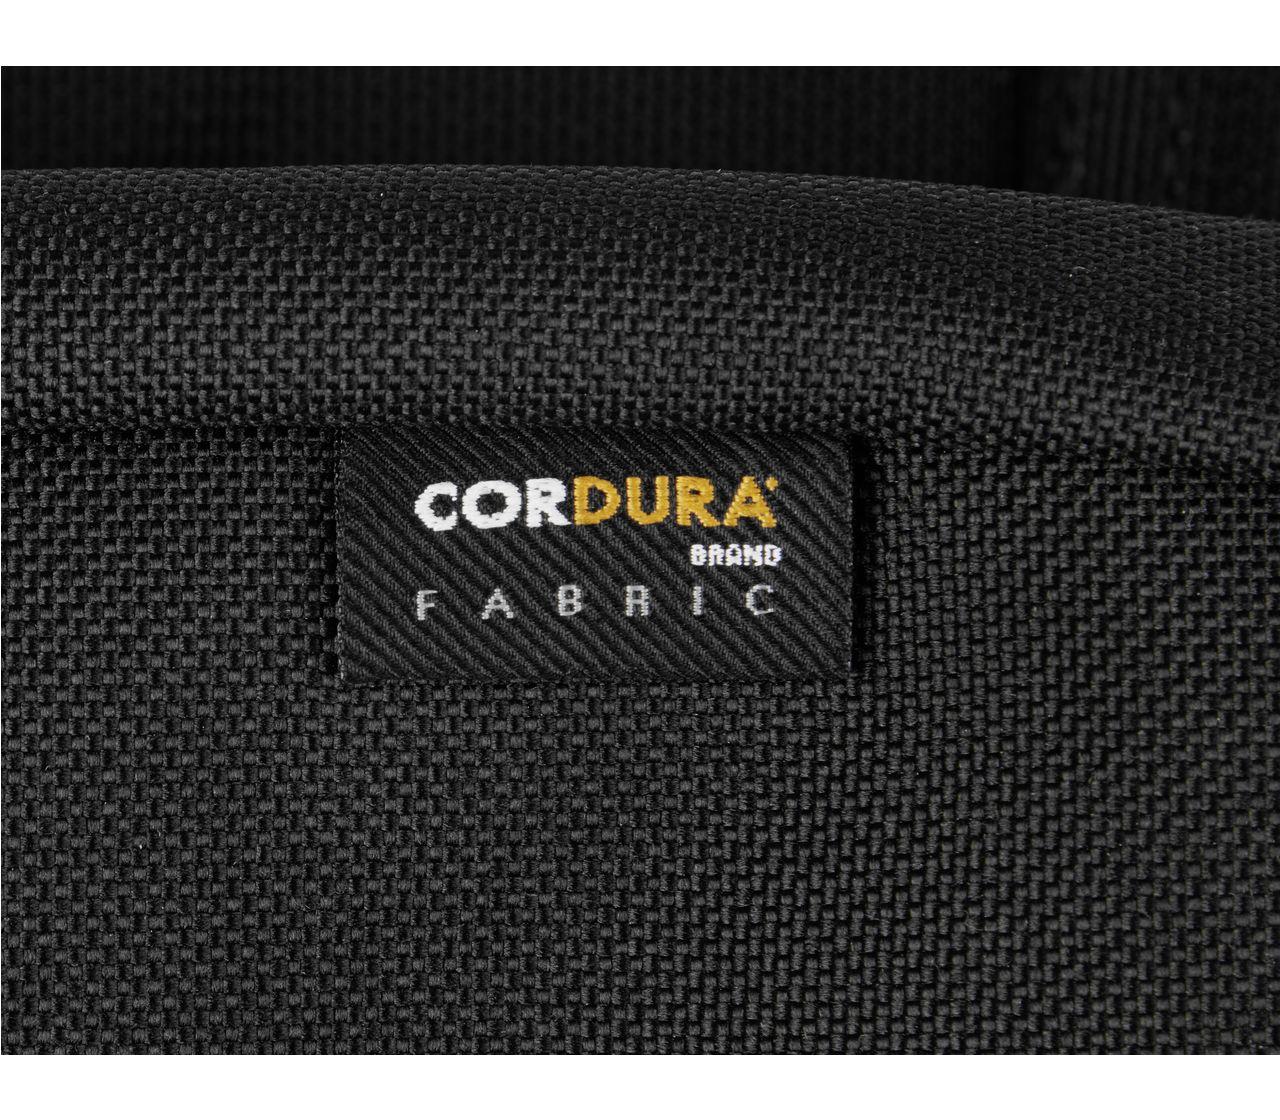 Werks Professional CORDURA® Wheeled Business Brief Compact-611476